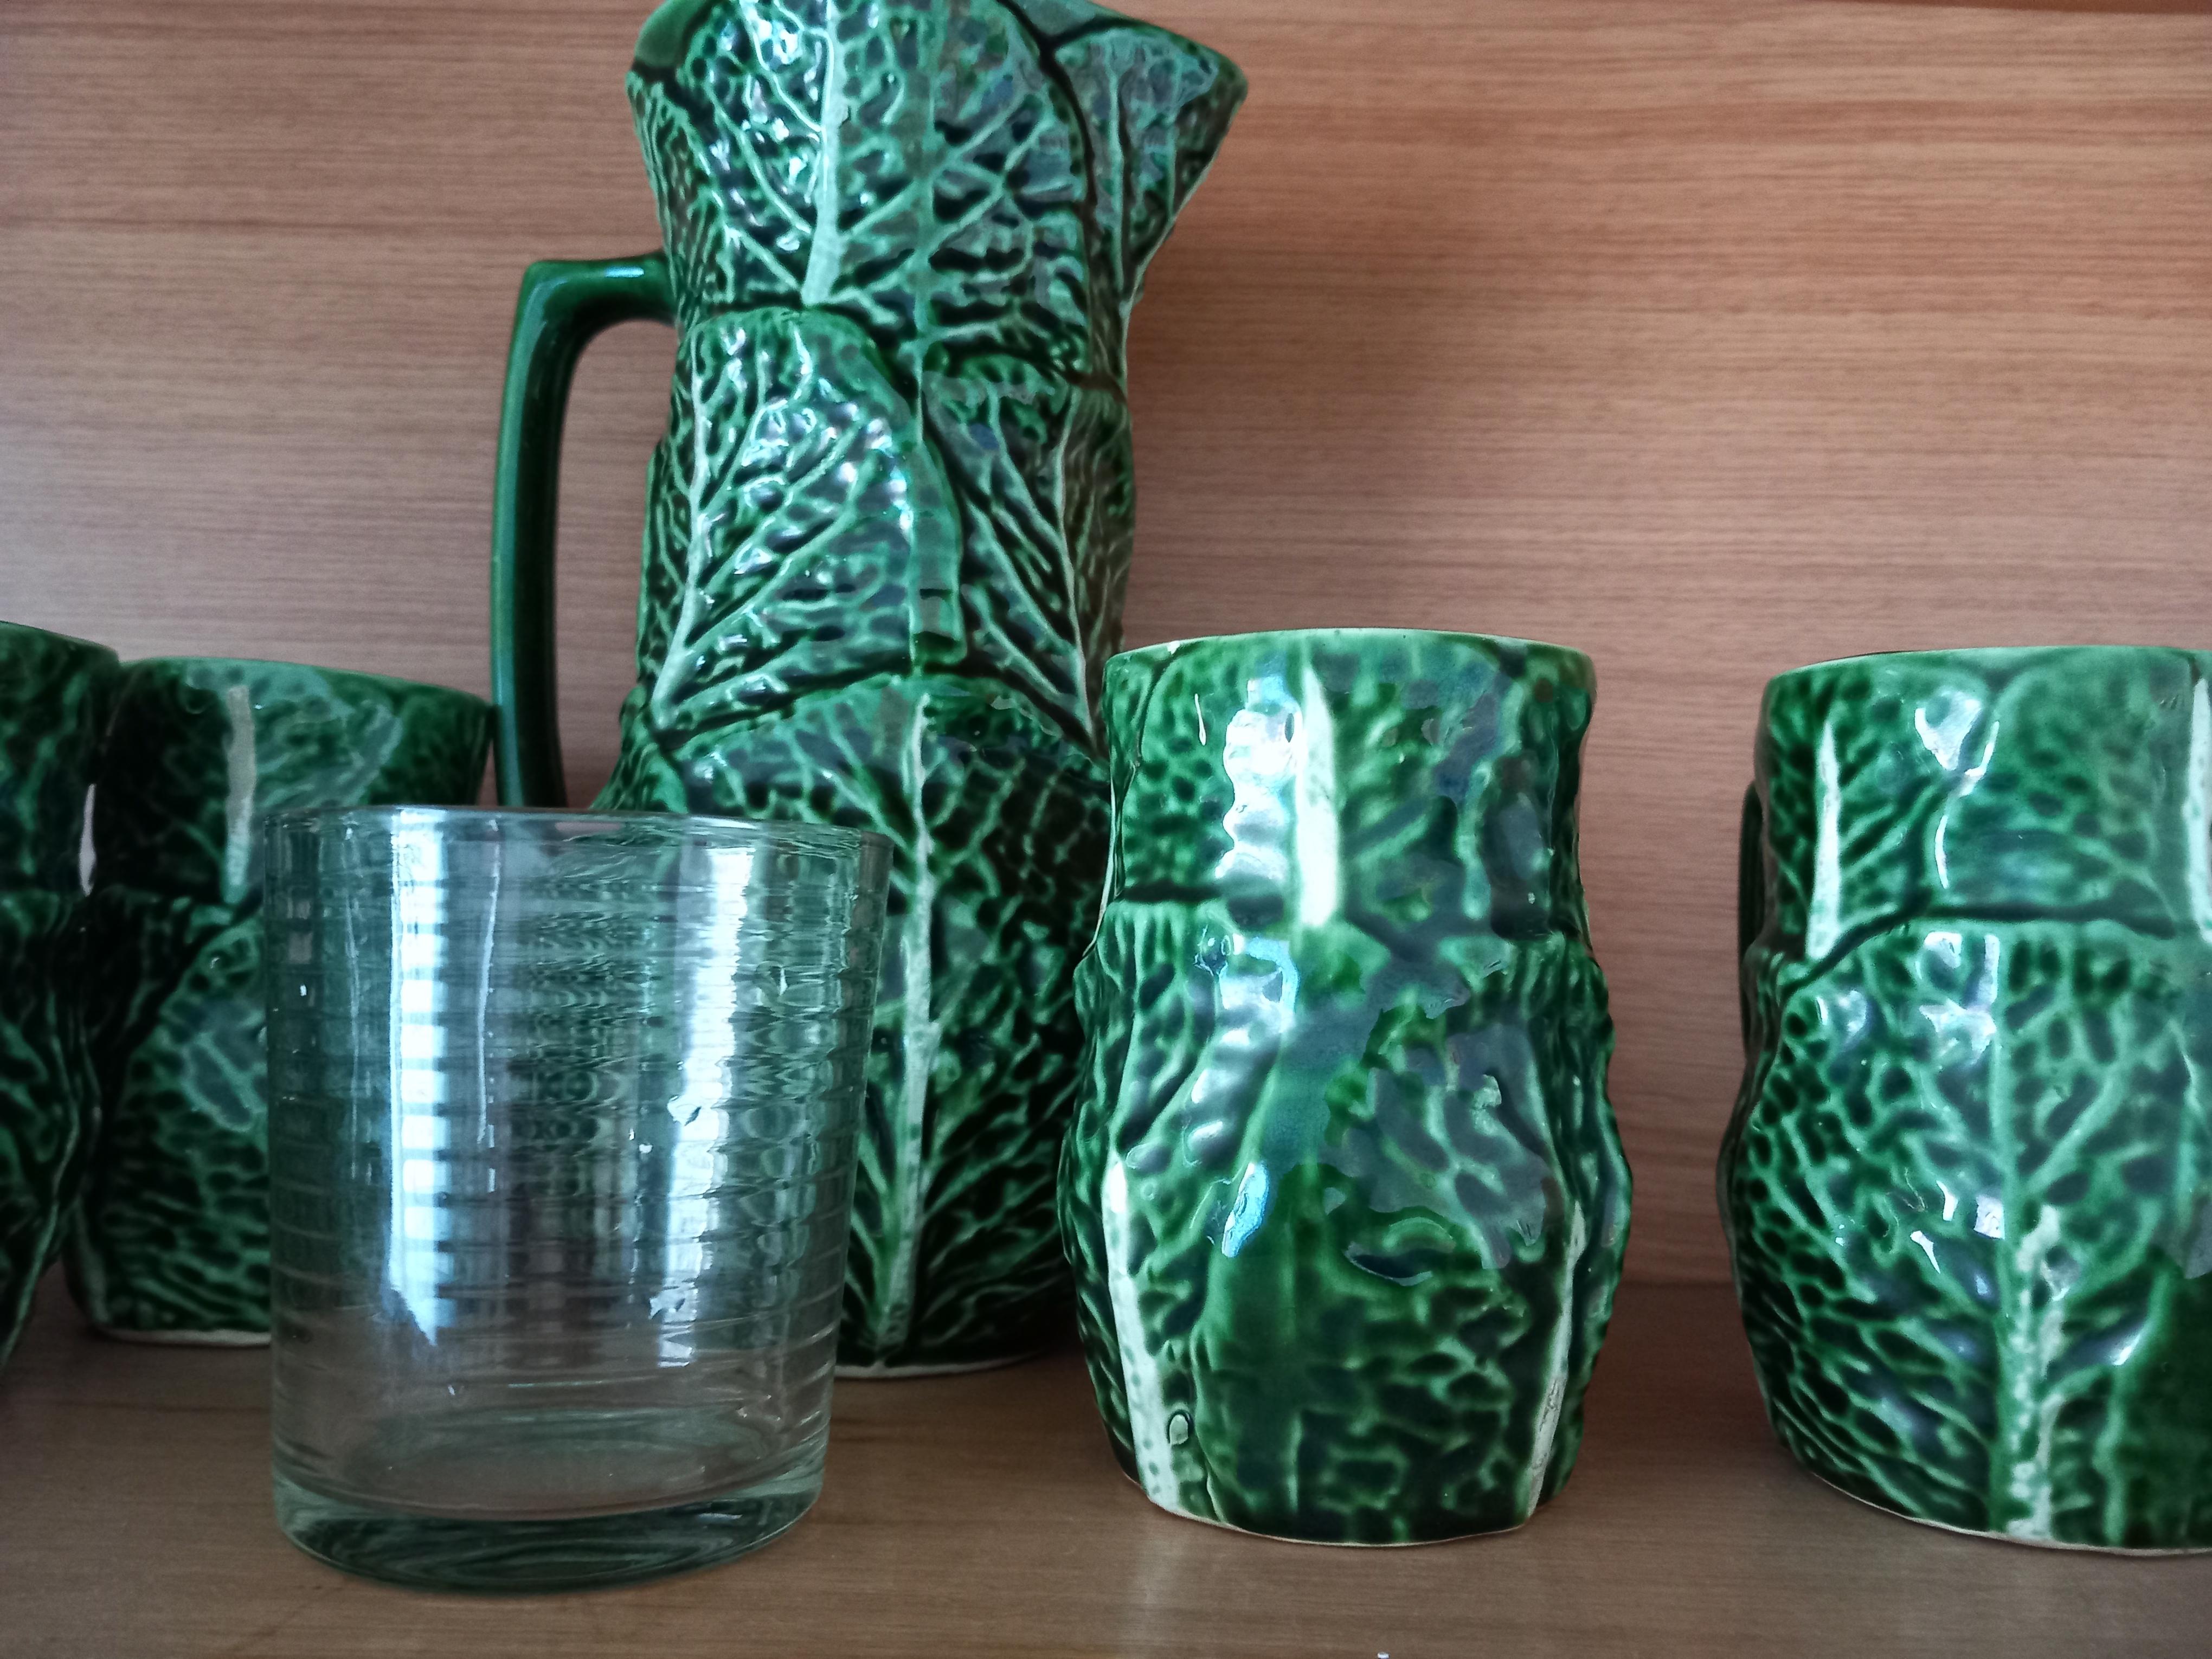 Set of Majolica ceramic jug and glasses in the shape of cabbage.
juice or water cups.
Like new, never used.